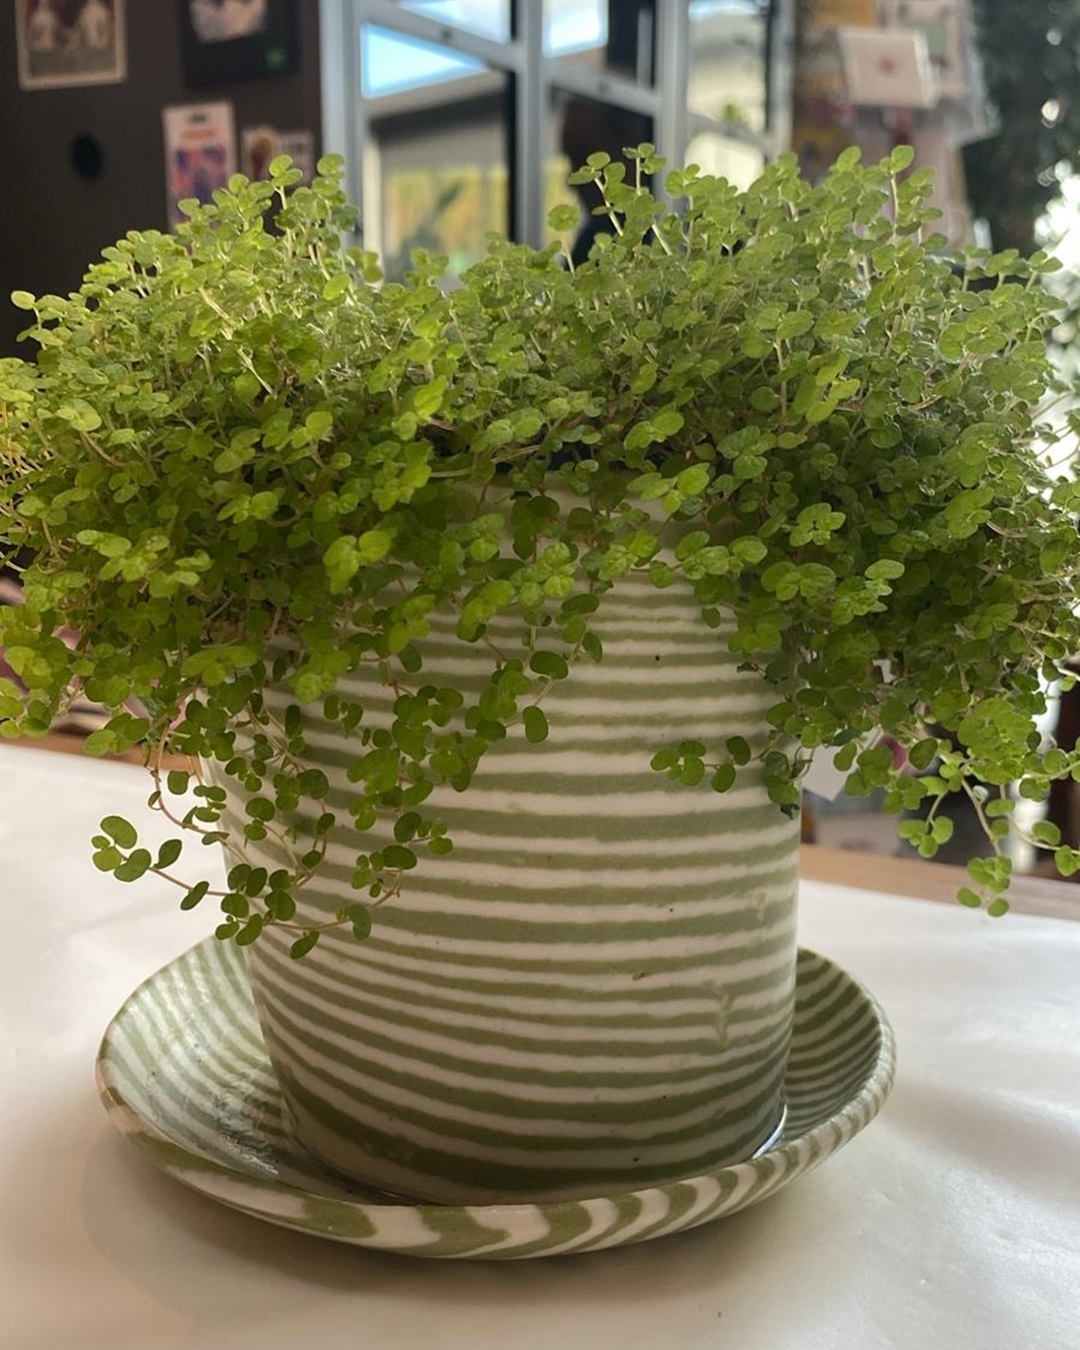 Green striped planter with saucer on table